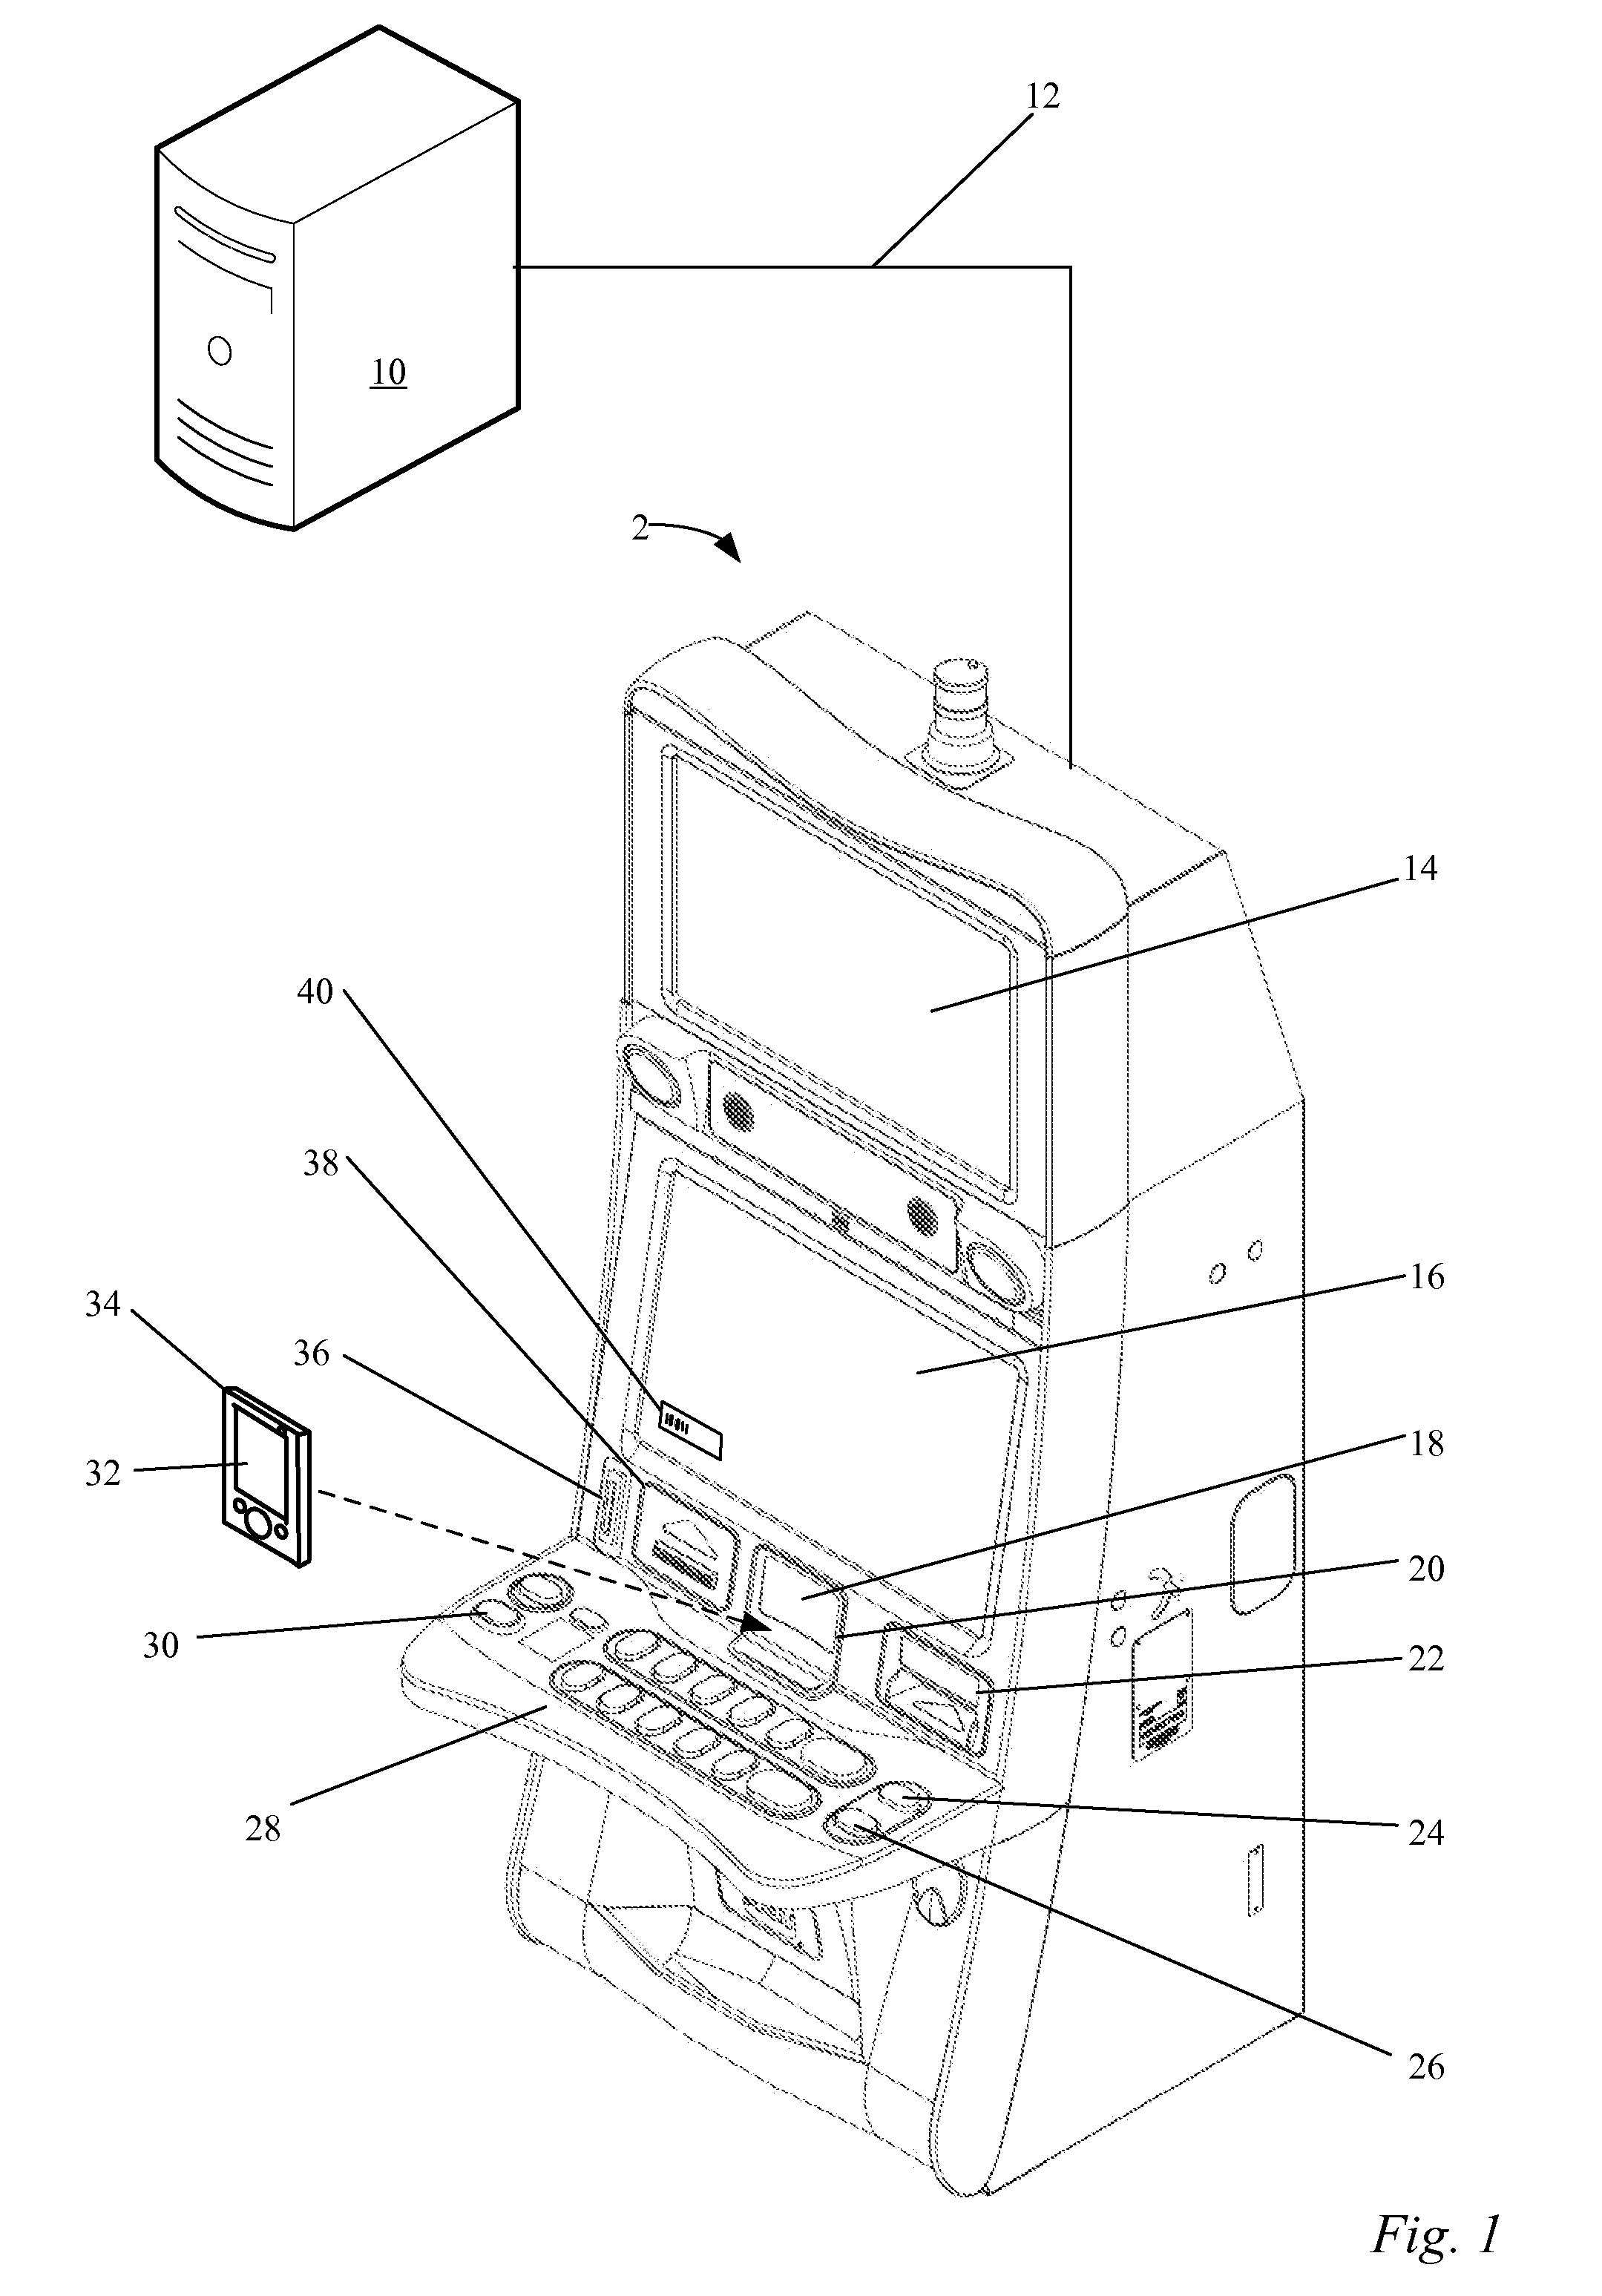 Bill acceptors and printers for providing virtual ticket-in and ticket-out on a gaming machine